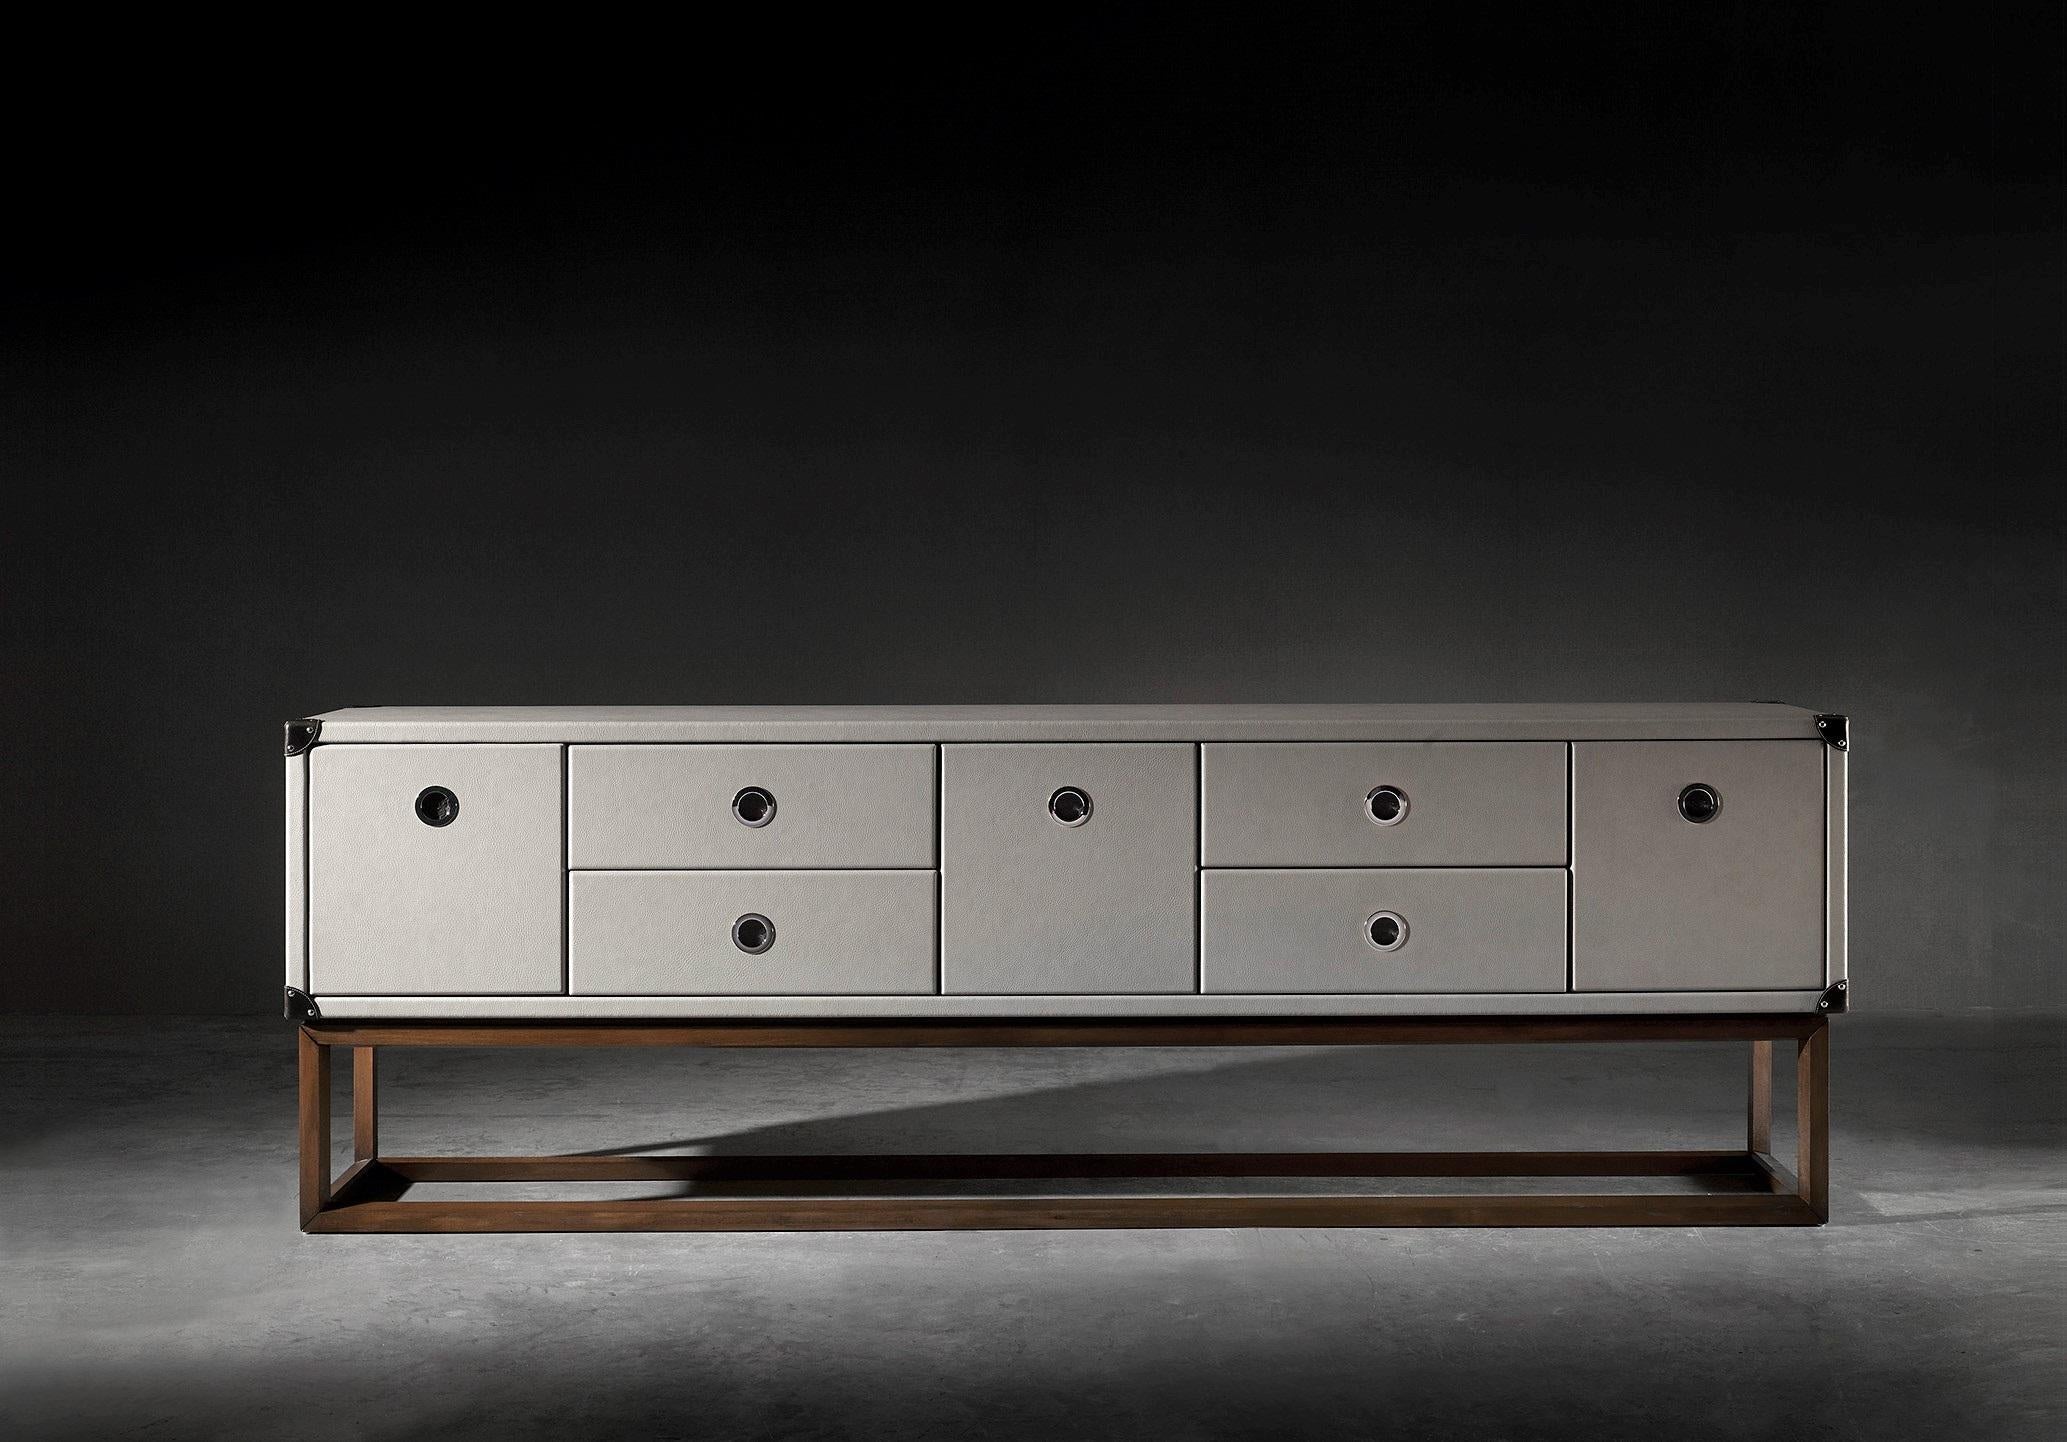 The Compass sideboard is characterized by its upholstery in plain eco leather and the attention to detail with its leather straps, borders and corners finished with pushpins. Its the ideal piece for interior spaces both classical and contemporary.